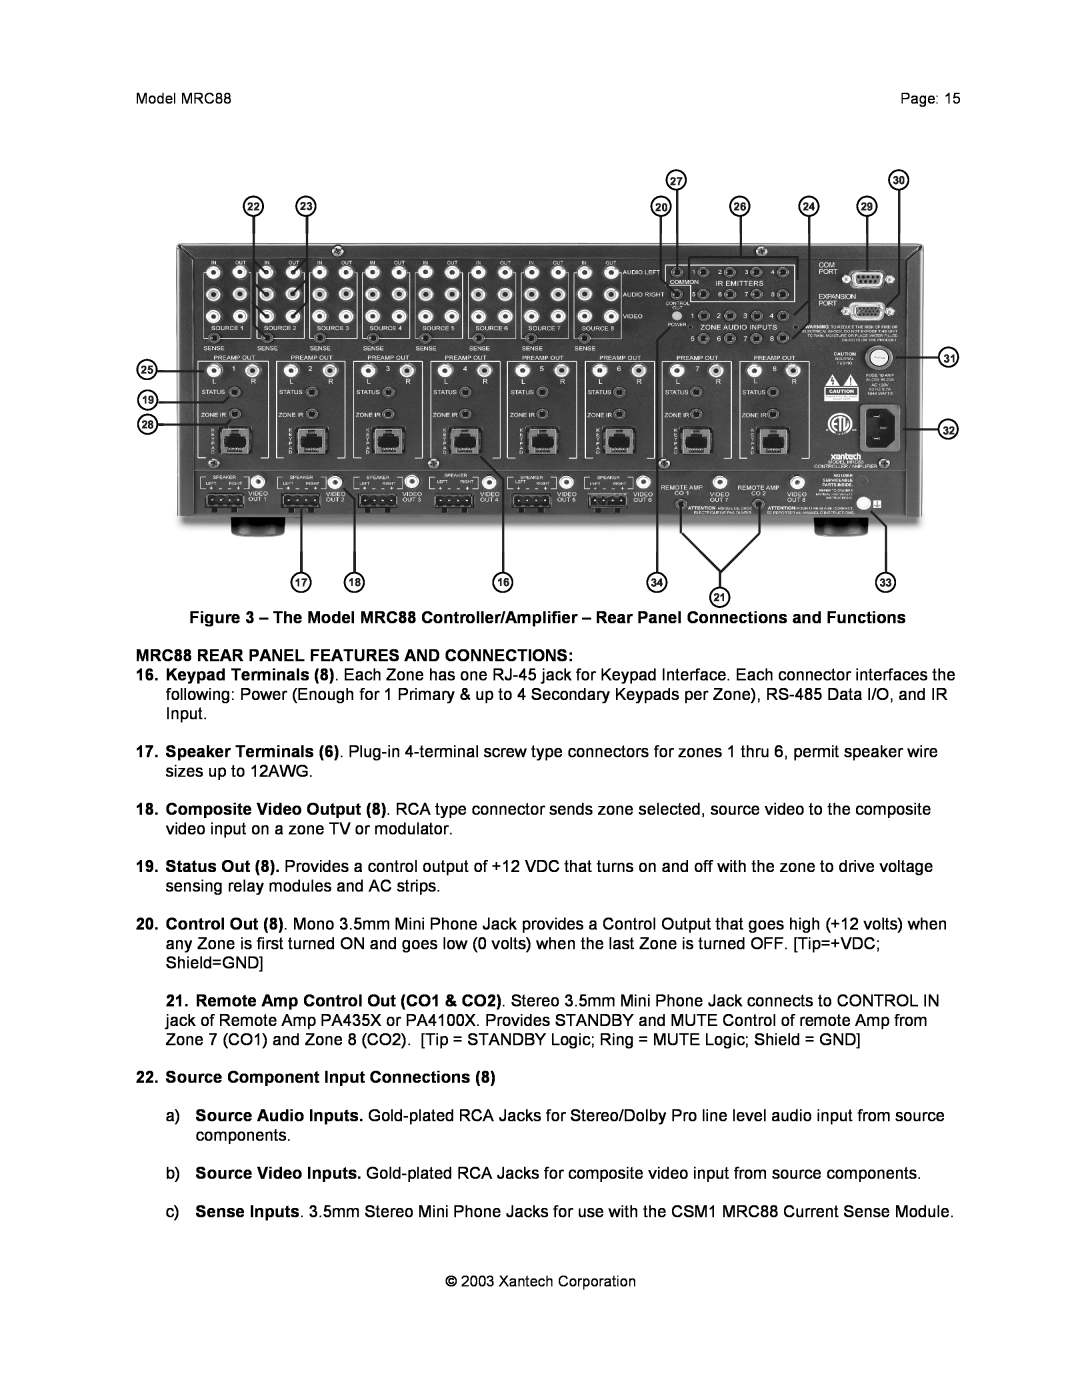 Xantech mrc88 installation instructions MRC88 REAR PANEL FEATURES AND CONNECTIONS, Source Component Input Connections 